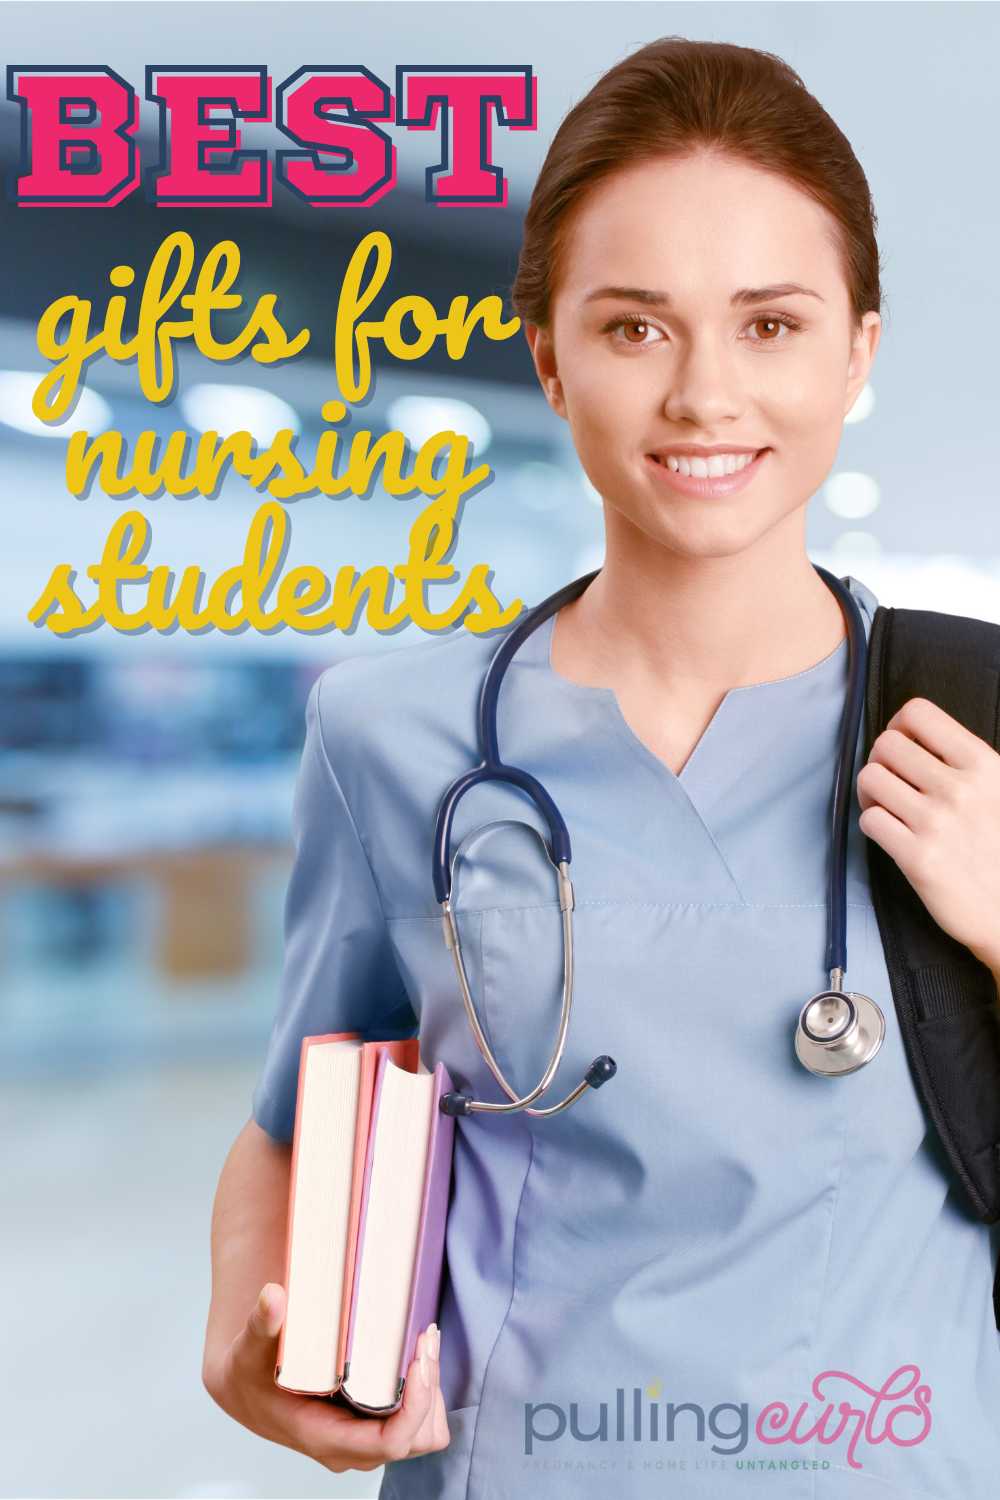 nursing student gift cards new nurse perfect gift best gifts long shifts compression socks great gift practical gifts great way pen light nursing school tote bag thoughtful gift student nurses littmann stethoscope badge reel hard work night shift nurse gifts student gifts 12-hour shifts special nurse clinical rotations essential oils healthcare workers via @pullingcurls